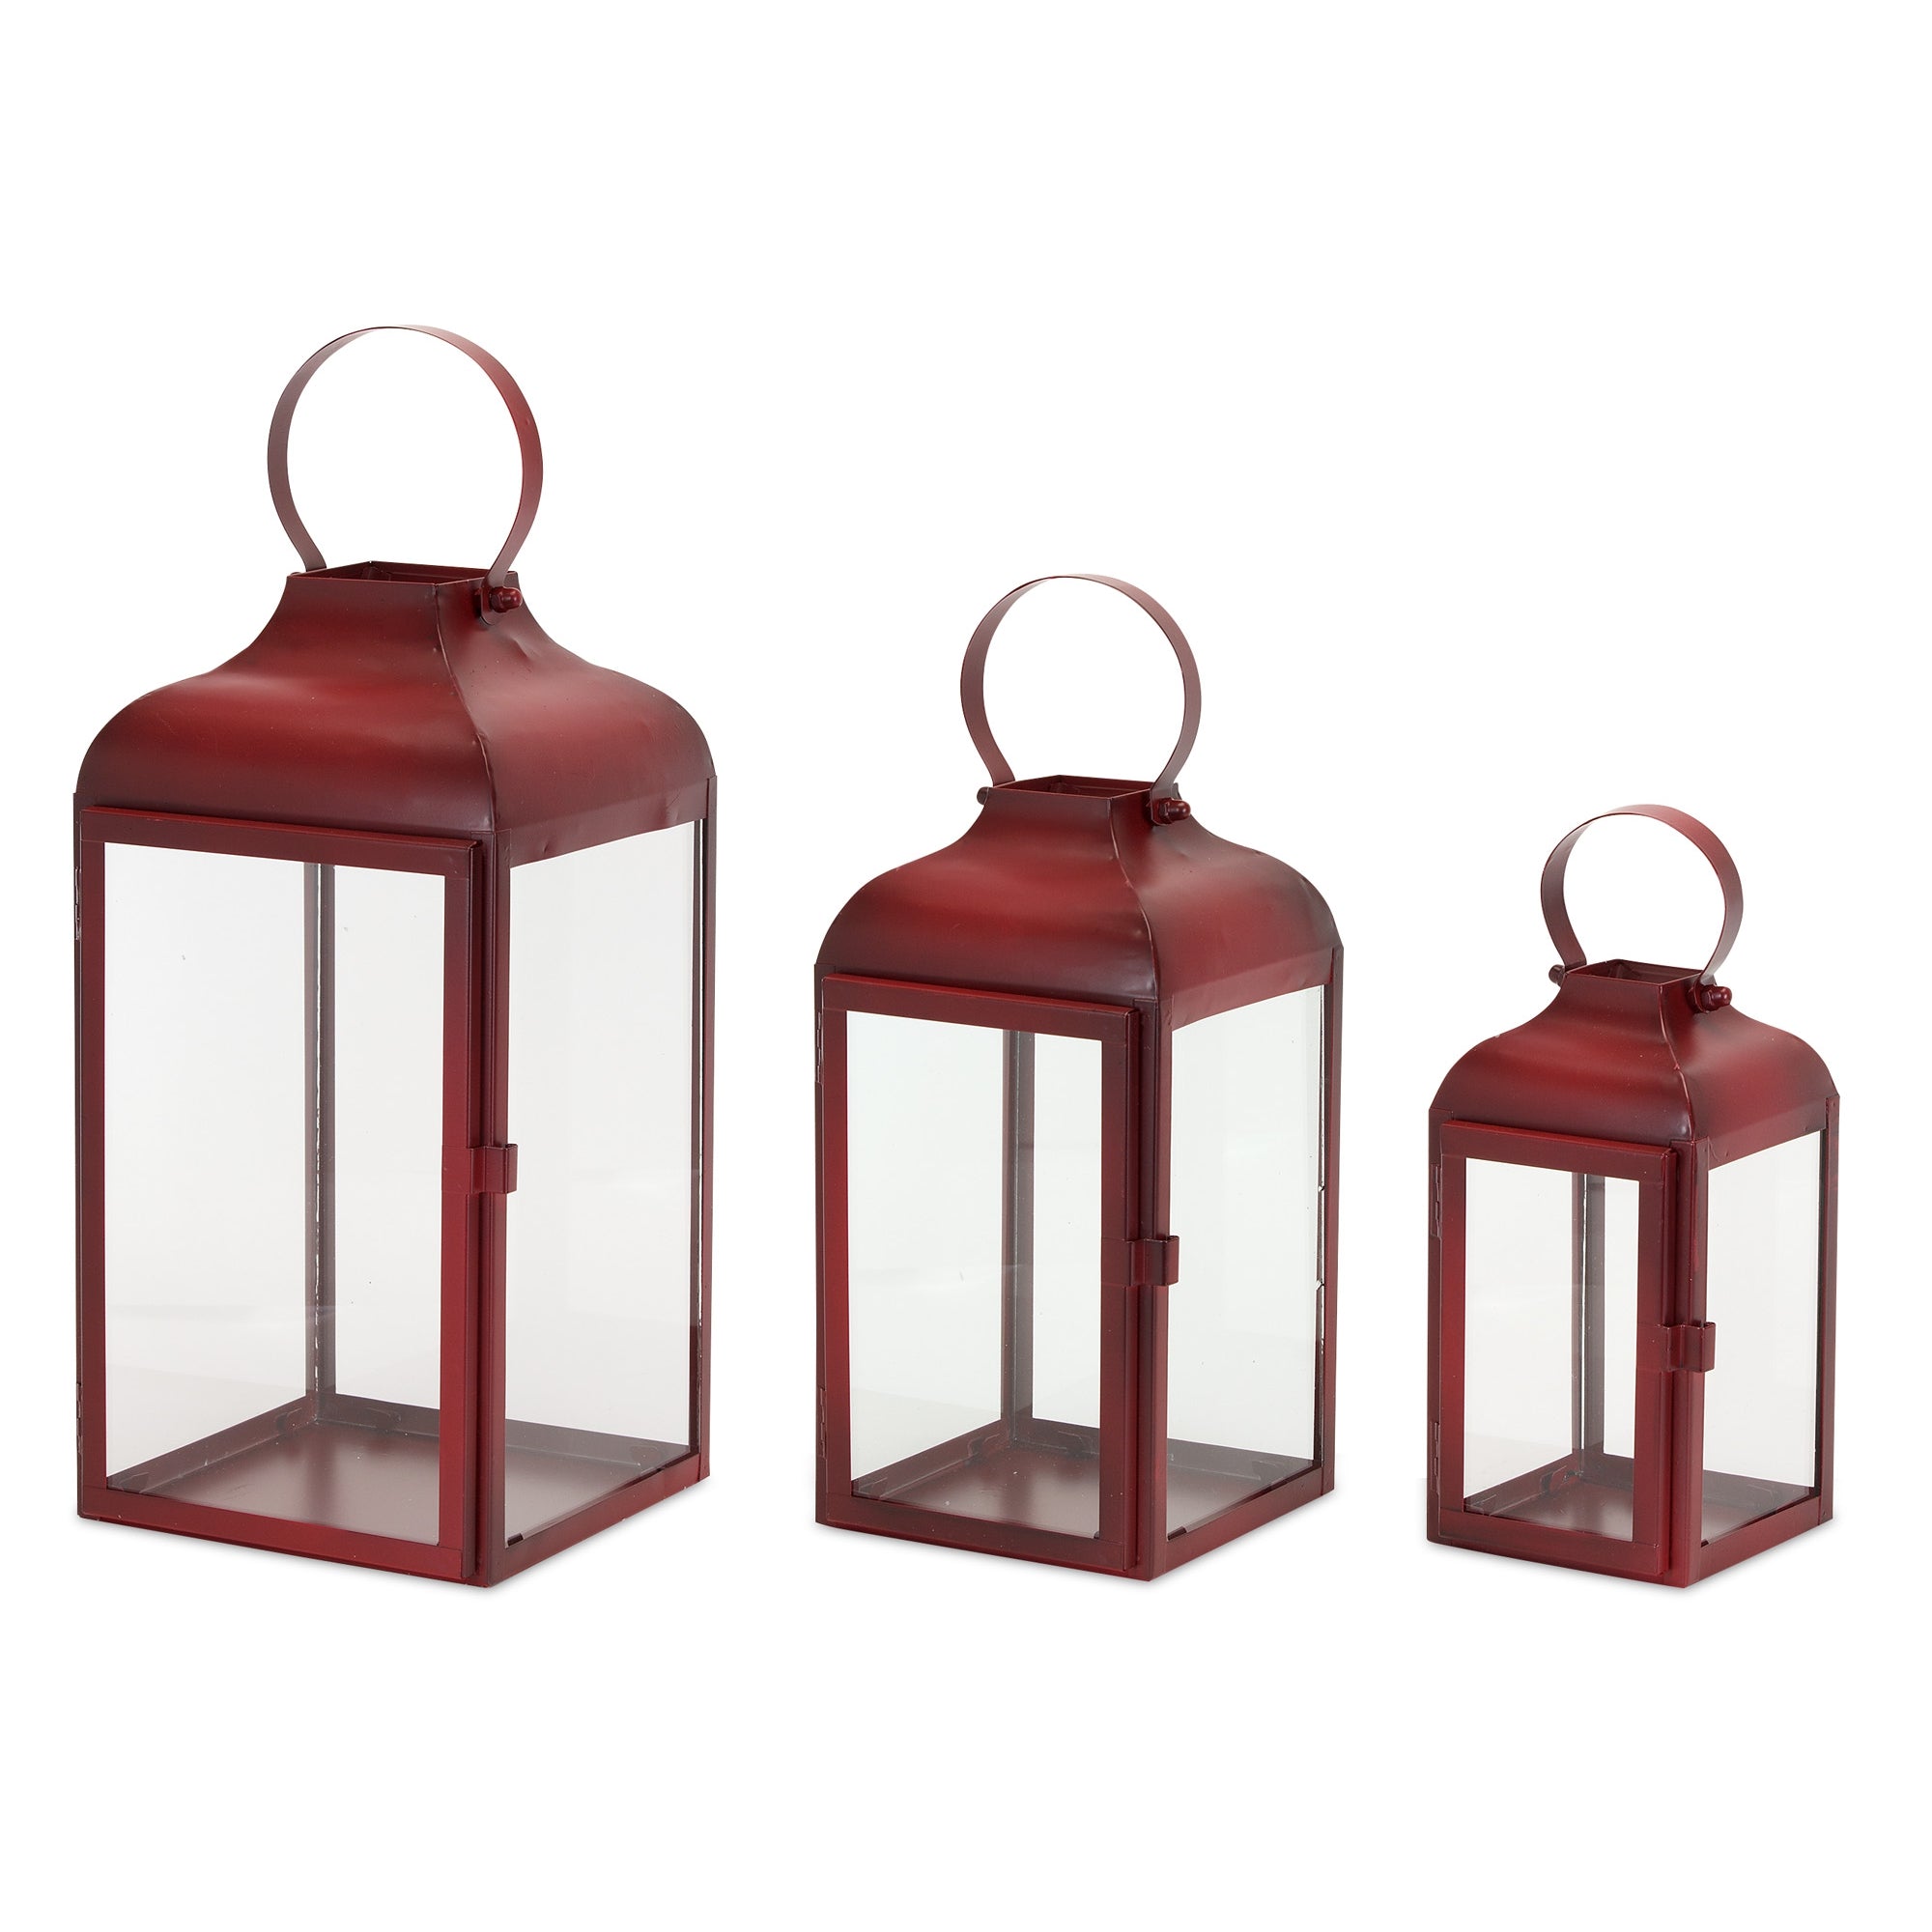 Set-Of-Two-Red-Flameless-Floor-Lantern-Candle-Holder-Candle-Holders